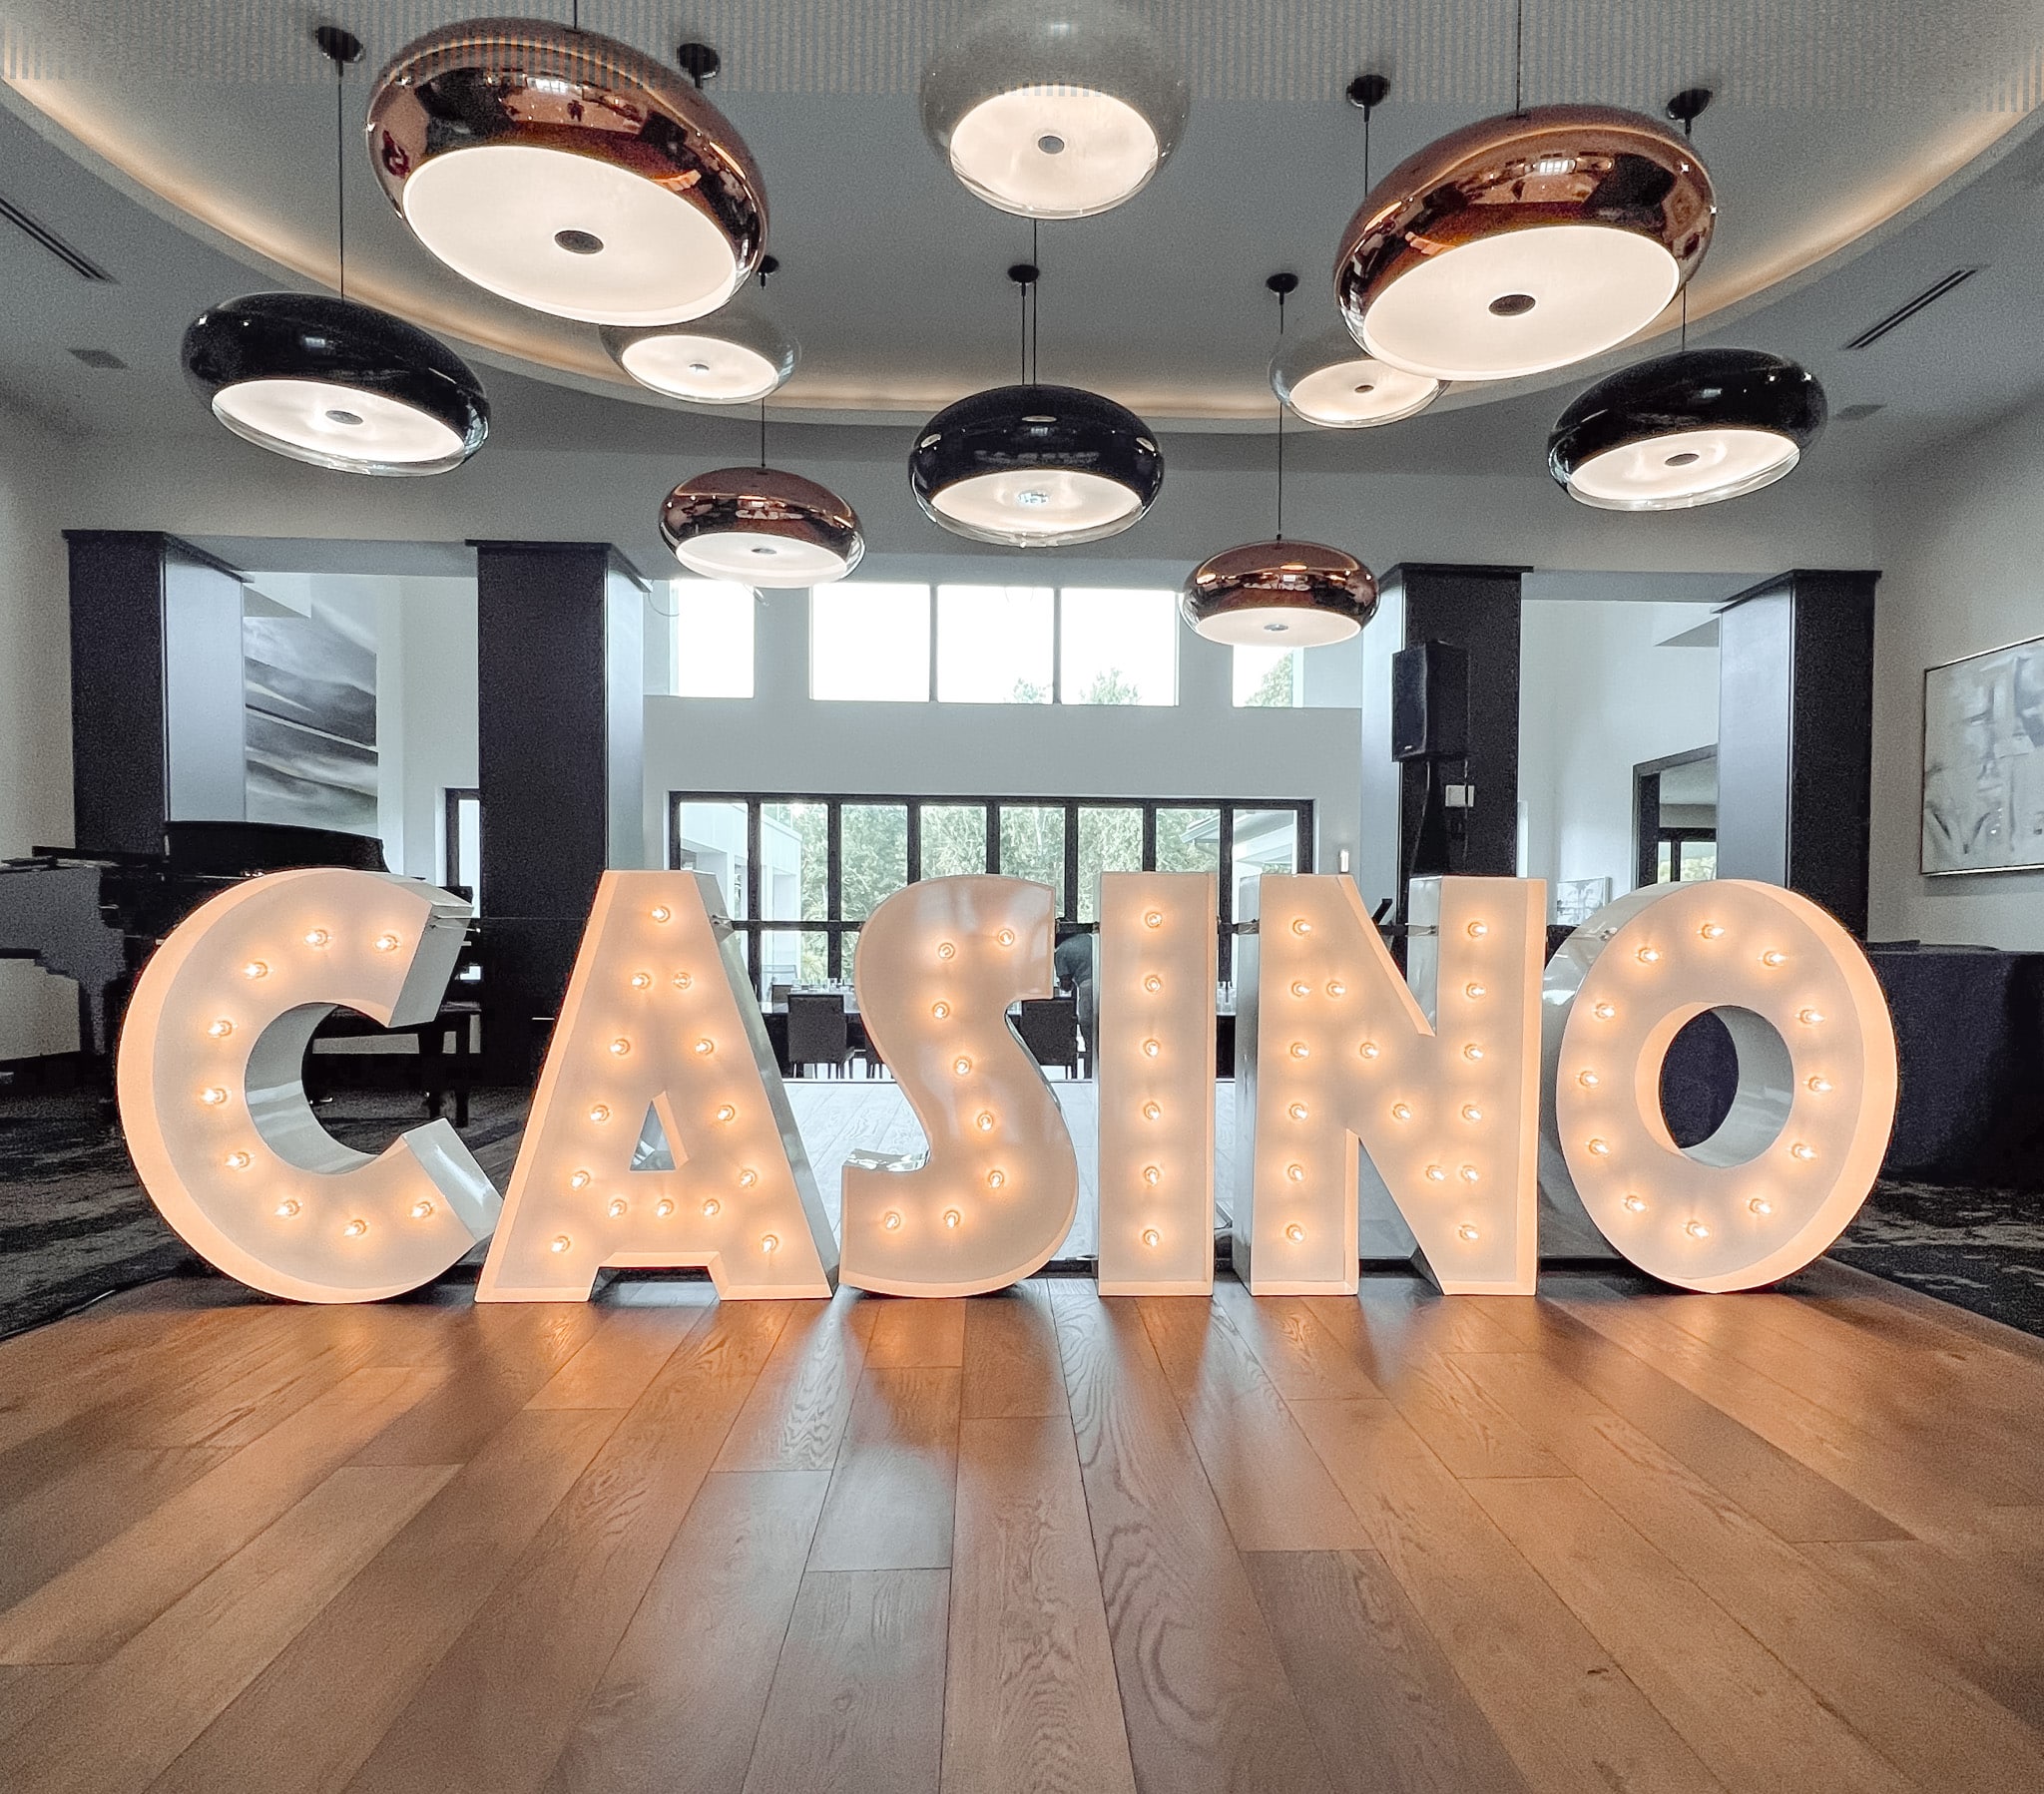 Light-Up Marquee Letters spelling out CASINO beneath modern lighting